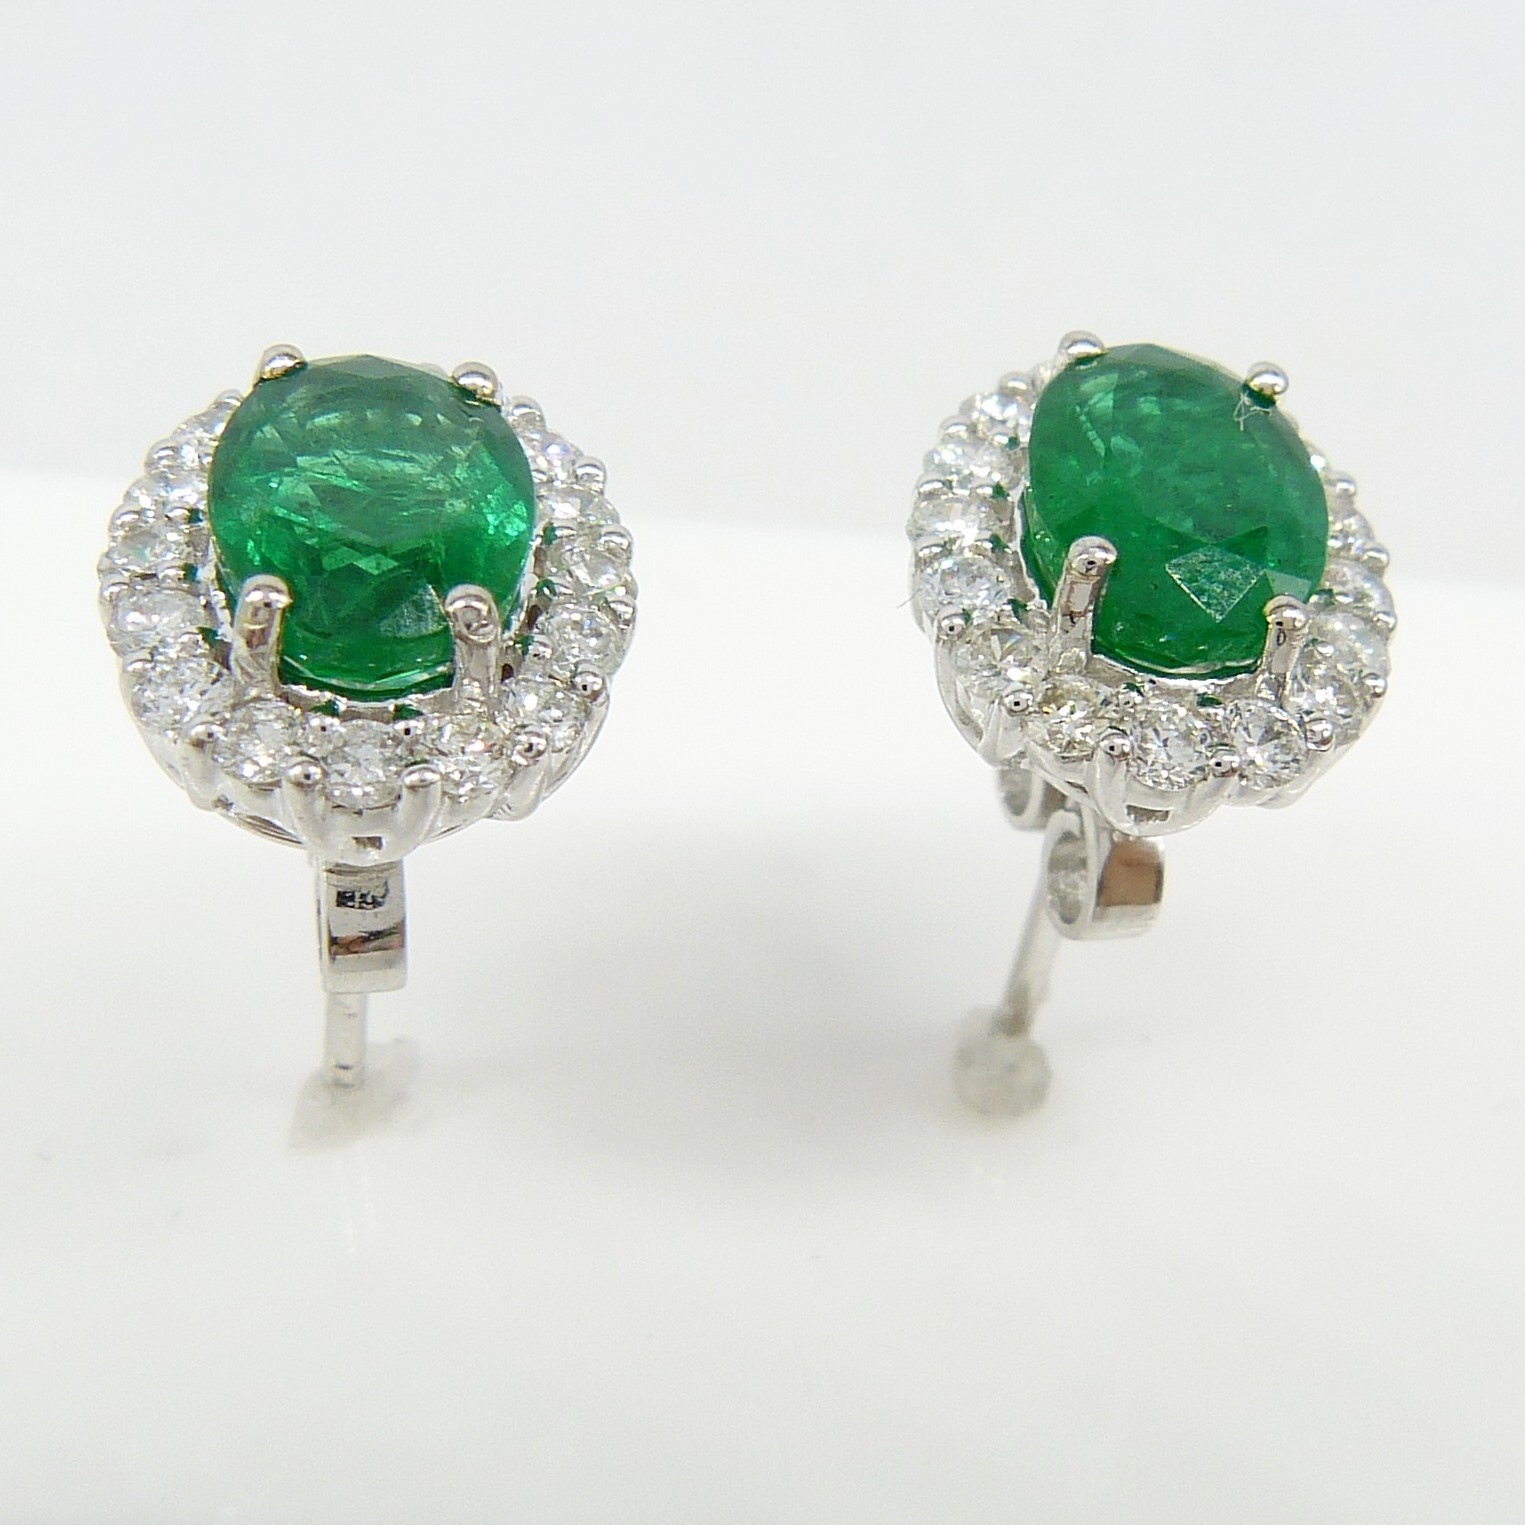 Pair of 18ct white gold 2.48 carat emerald and diamond halo ear studs, boxed - Image 3 of 8